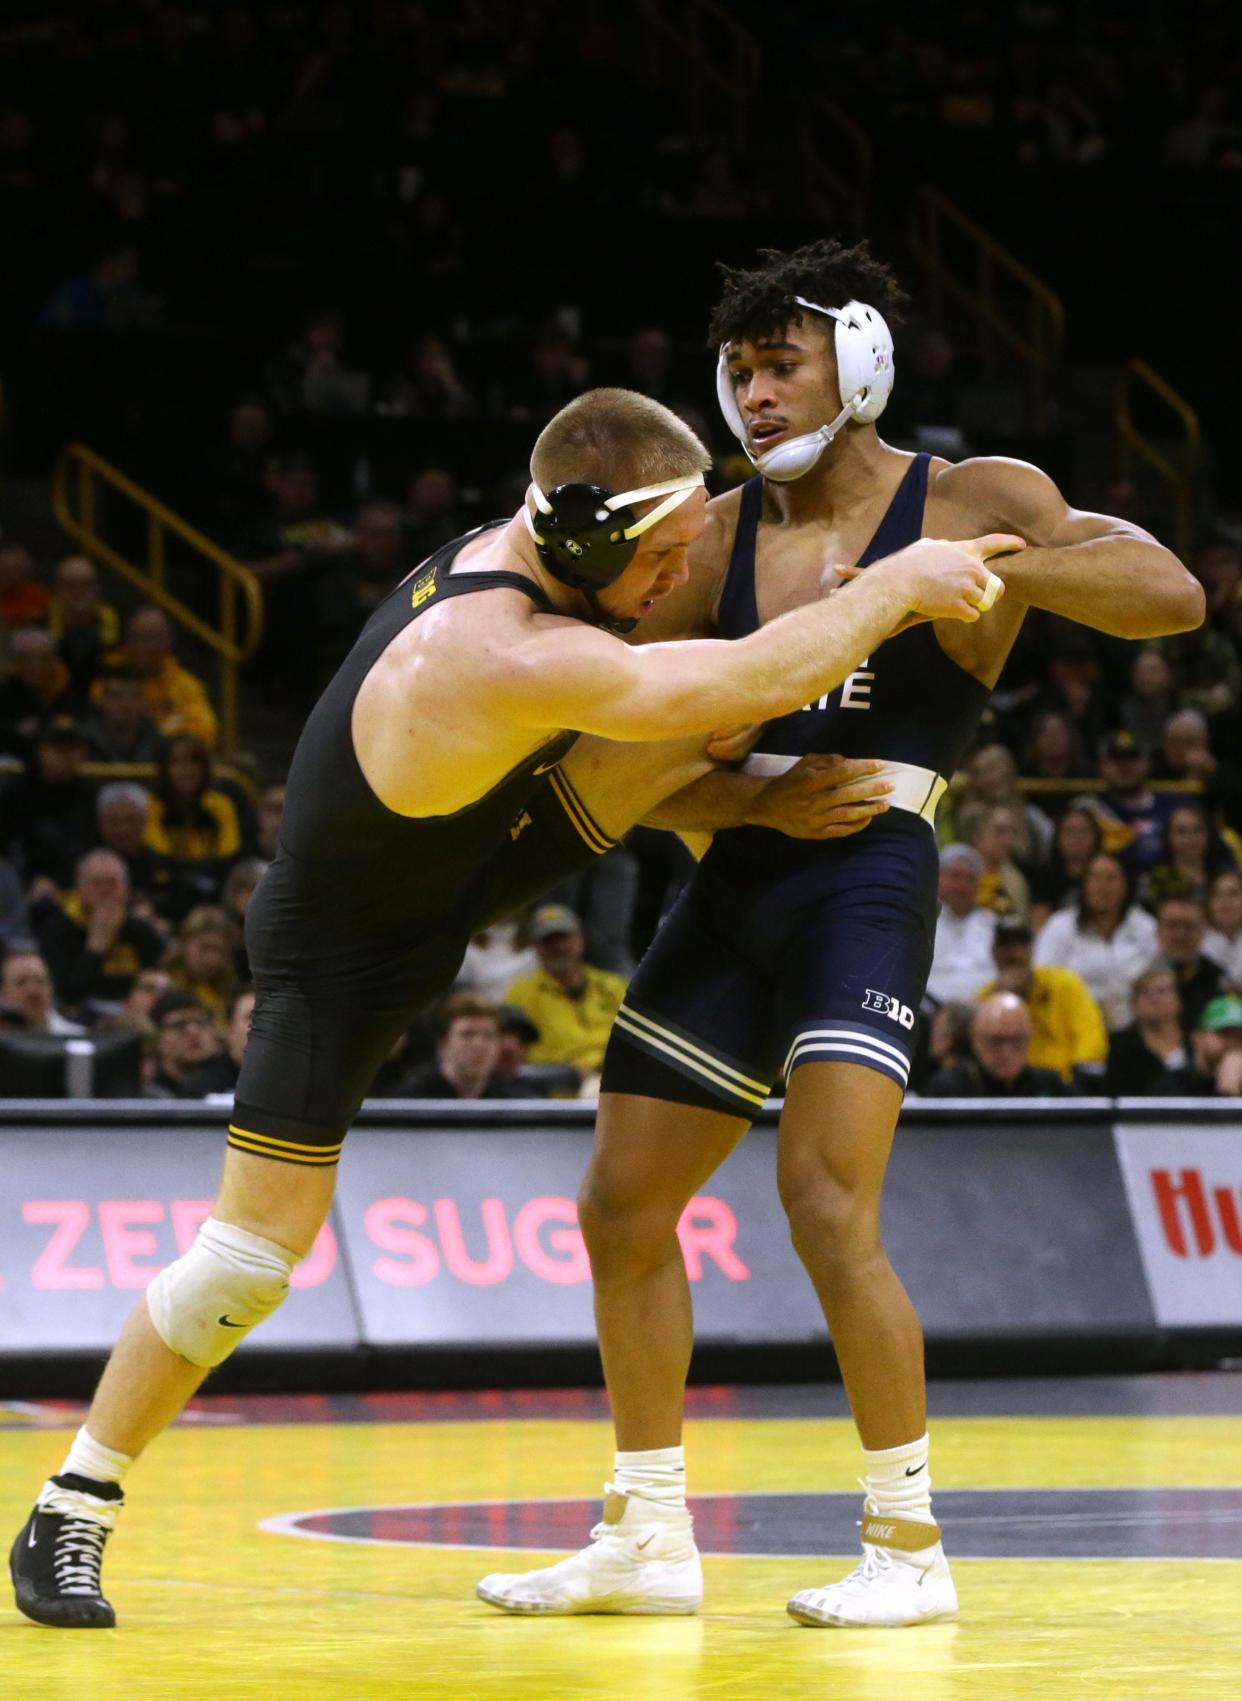 Iowa’s Patrick Kennedy, left, wrestles Penn State’s Carter Starocci in a 174-pound match Friday, Feb. 9, 2024 at Carver-Hawkeye Arena.